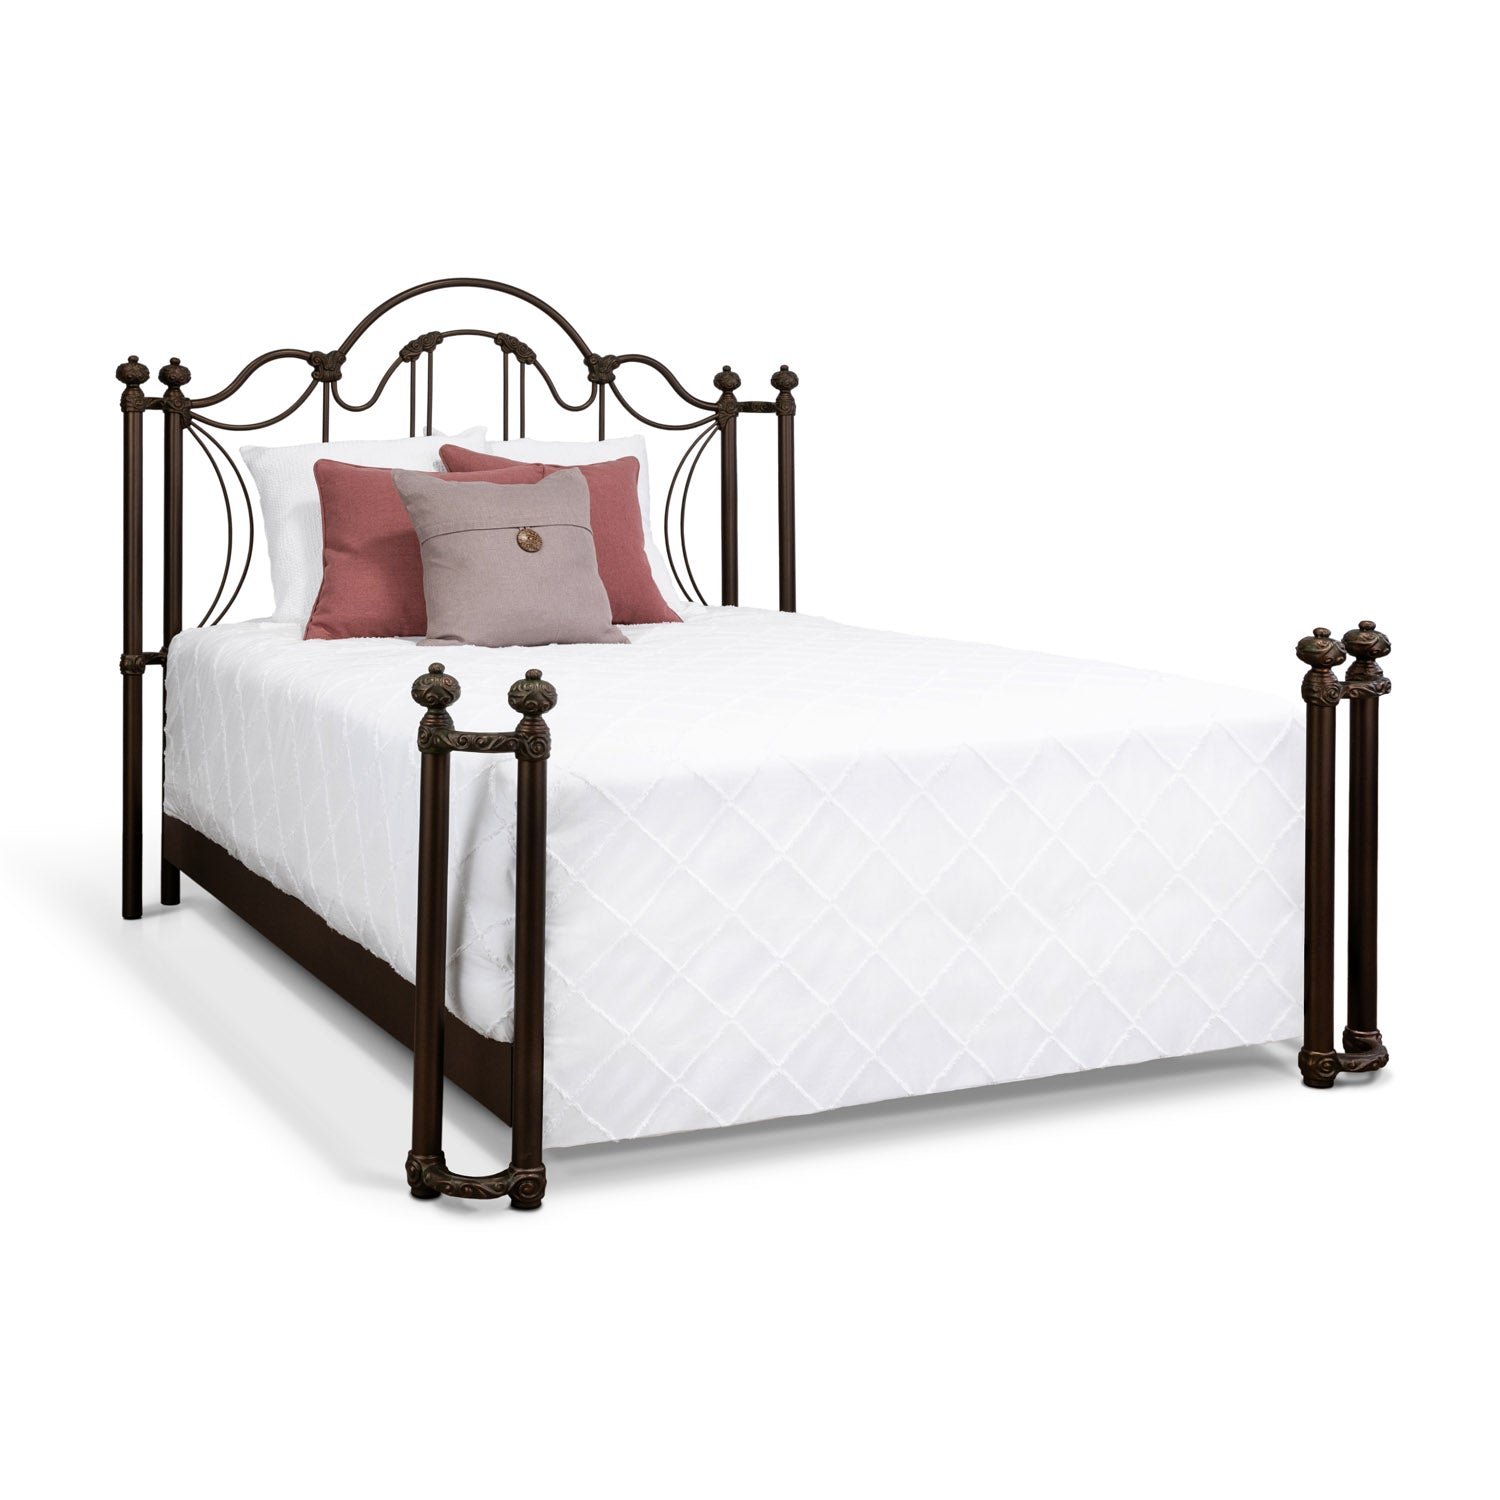 Marlow Cast Bed